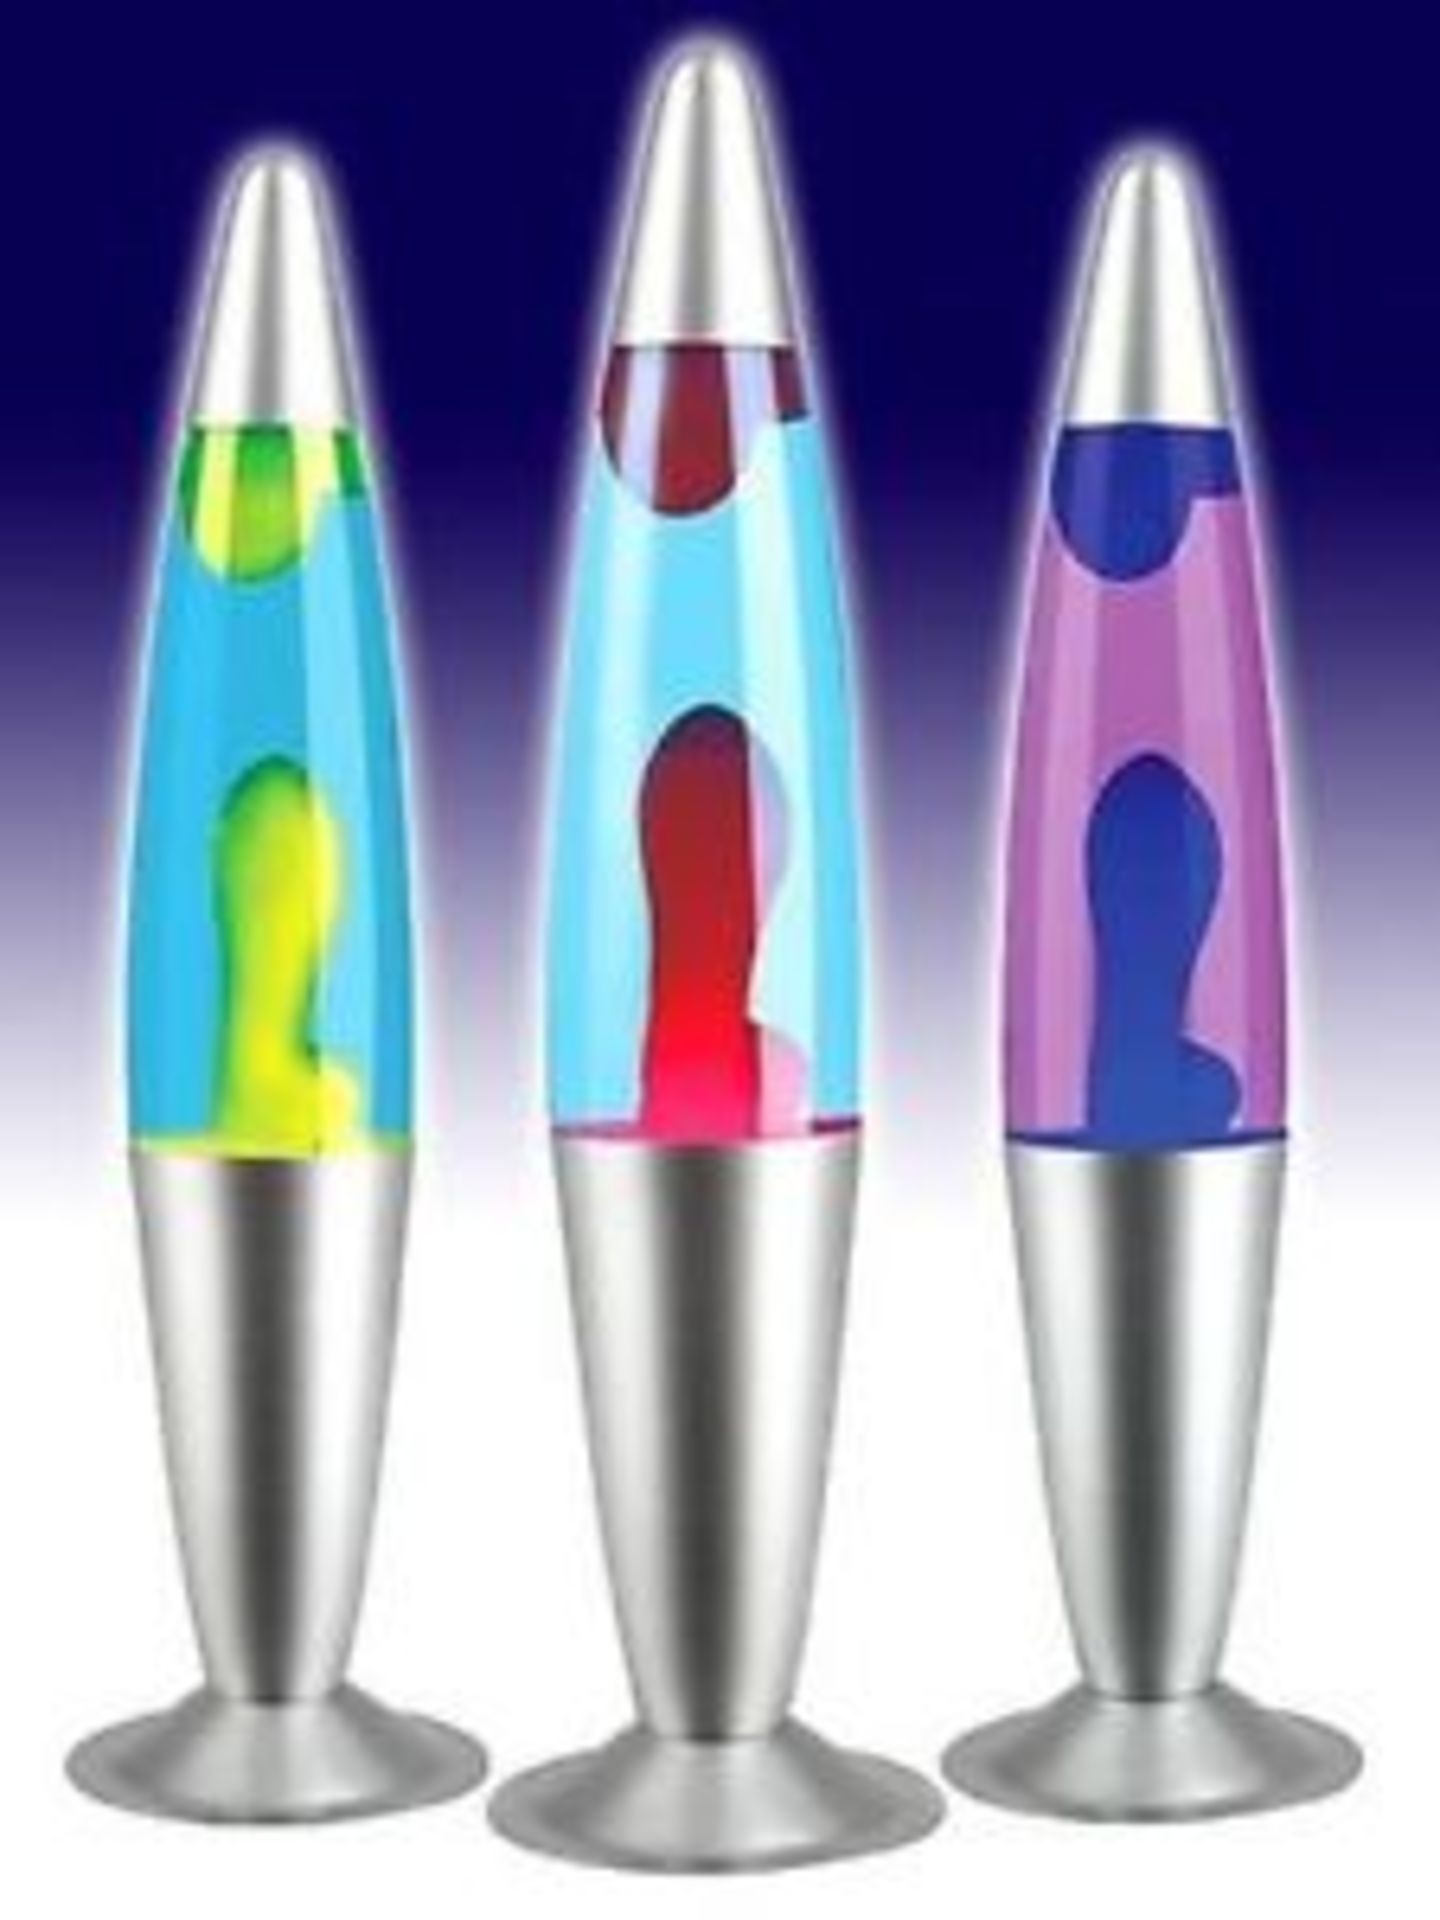 V Brand New Bullet Shaped Luna Lava Lamp X 2 YOUR BID PRICE TO BE MULTIPLIED BY TWO